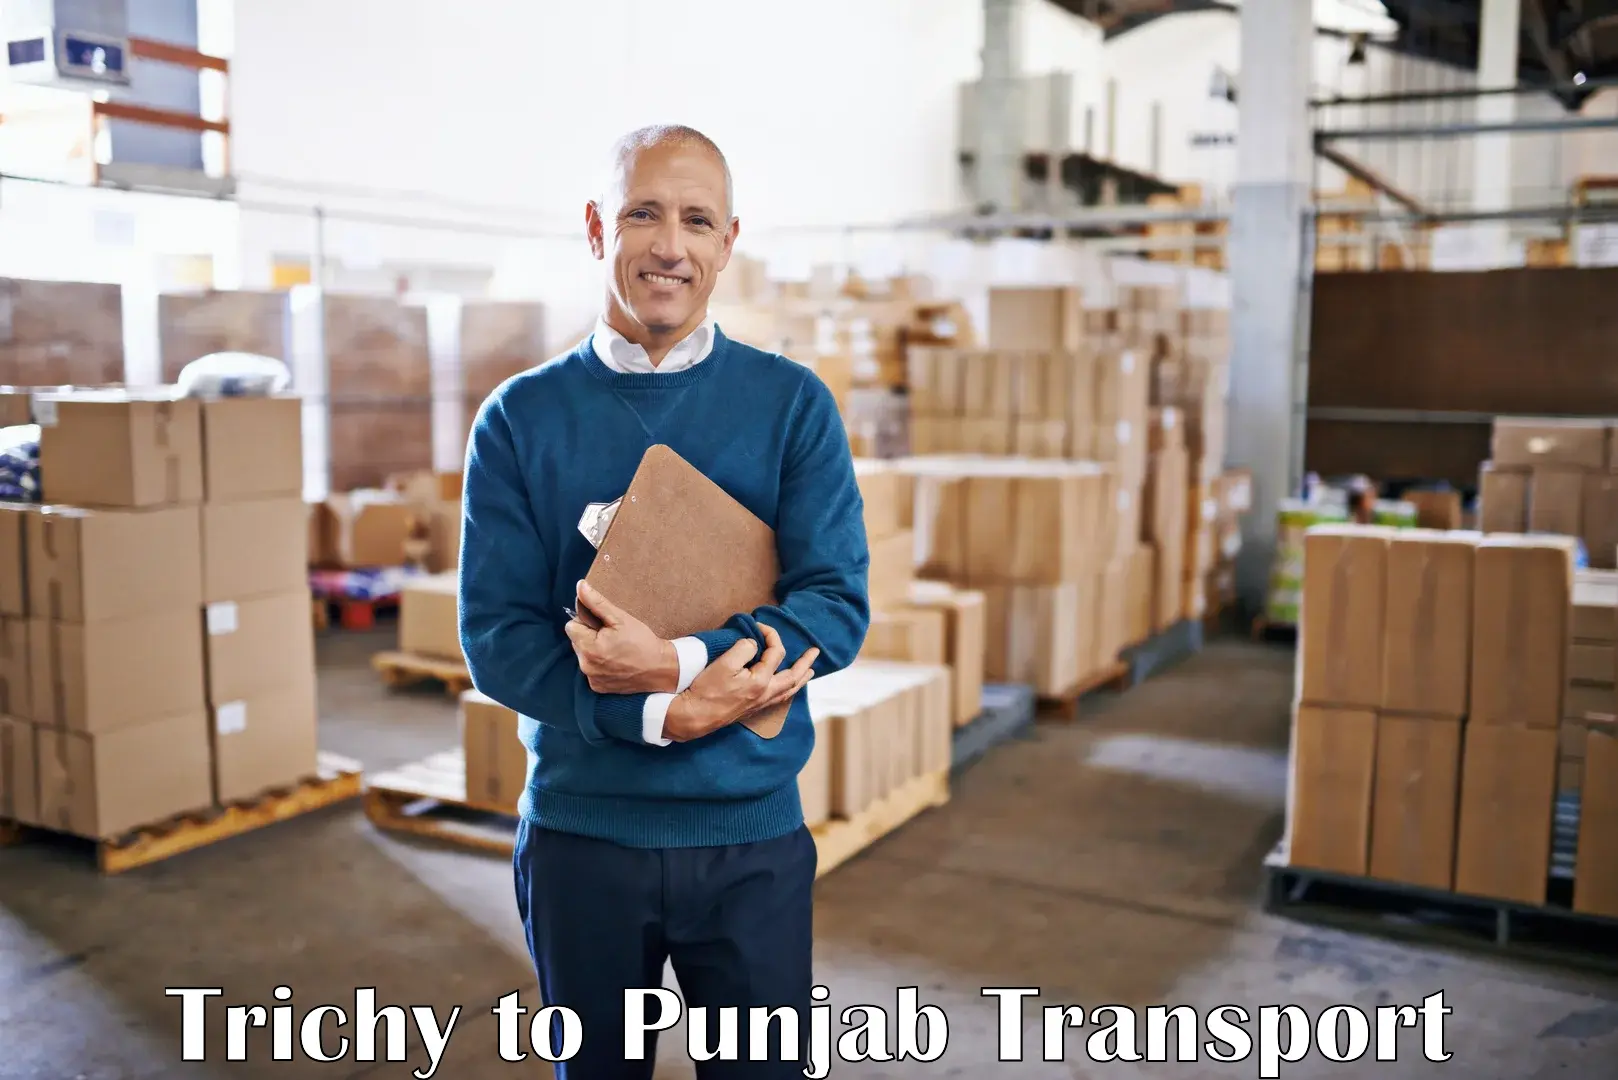 Shipping partner Trichy to Pathankot